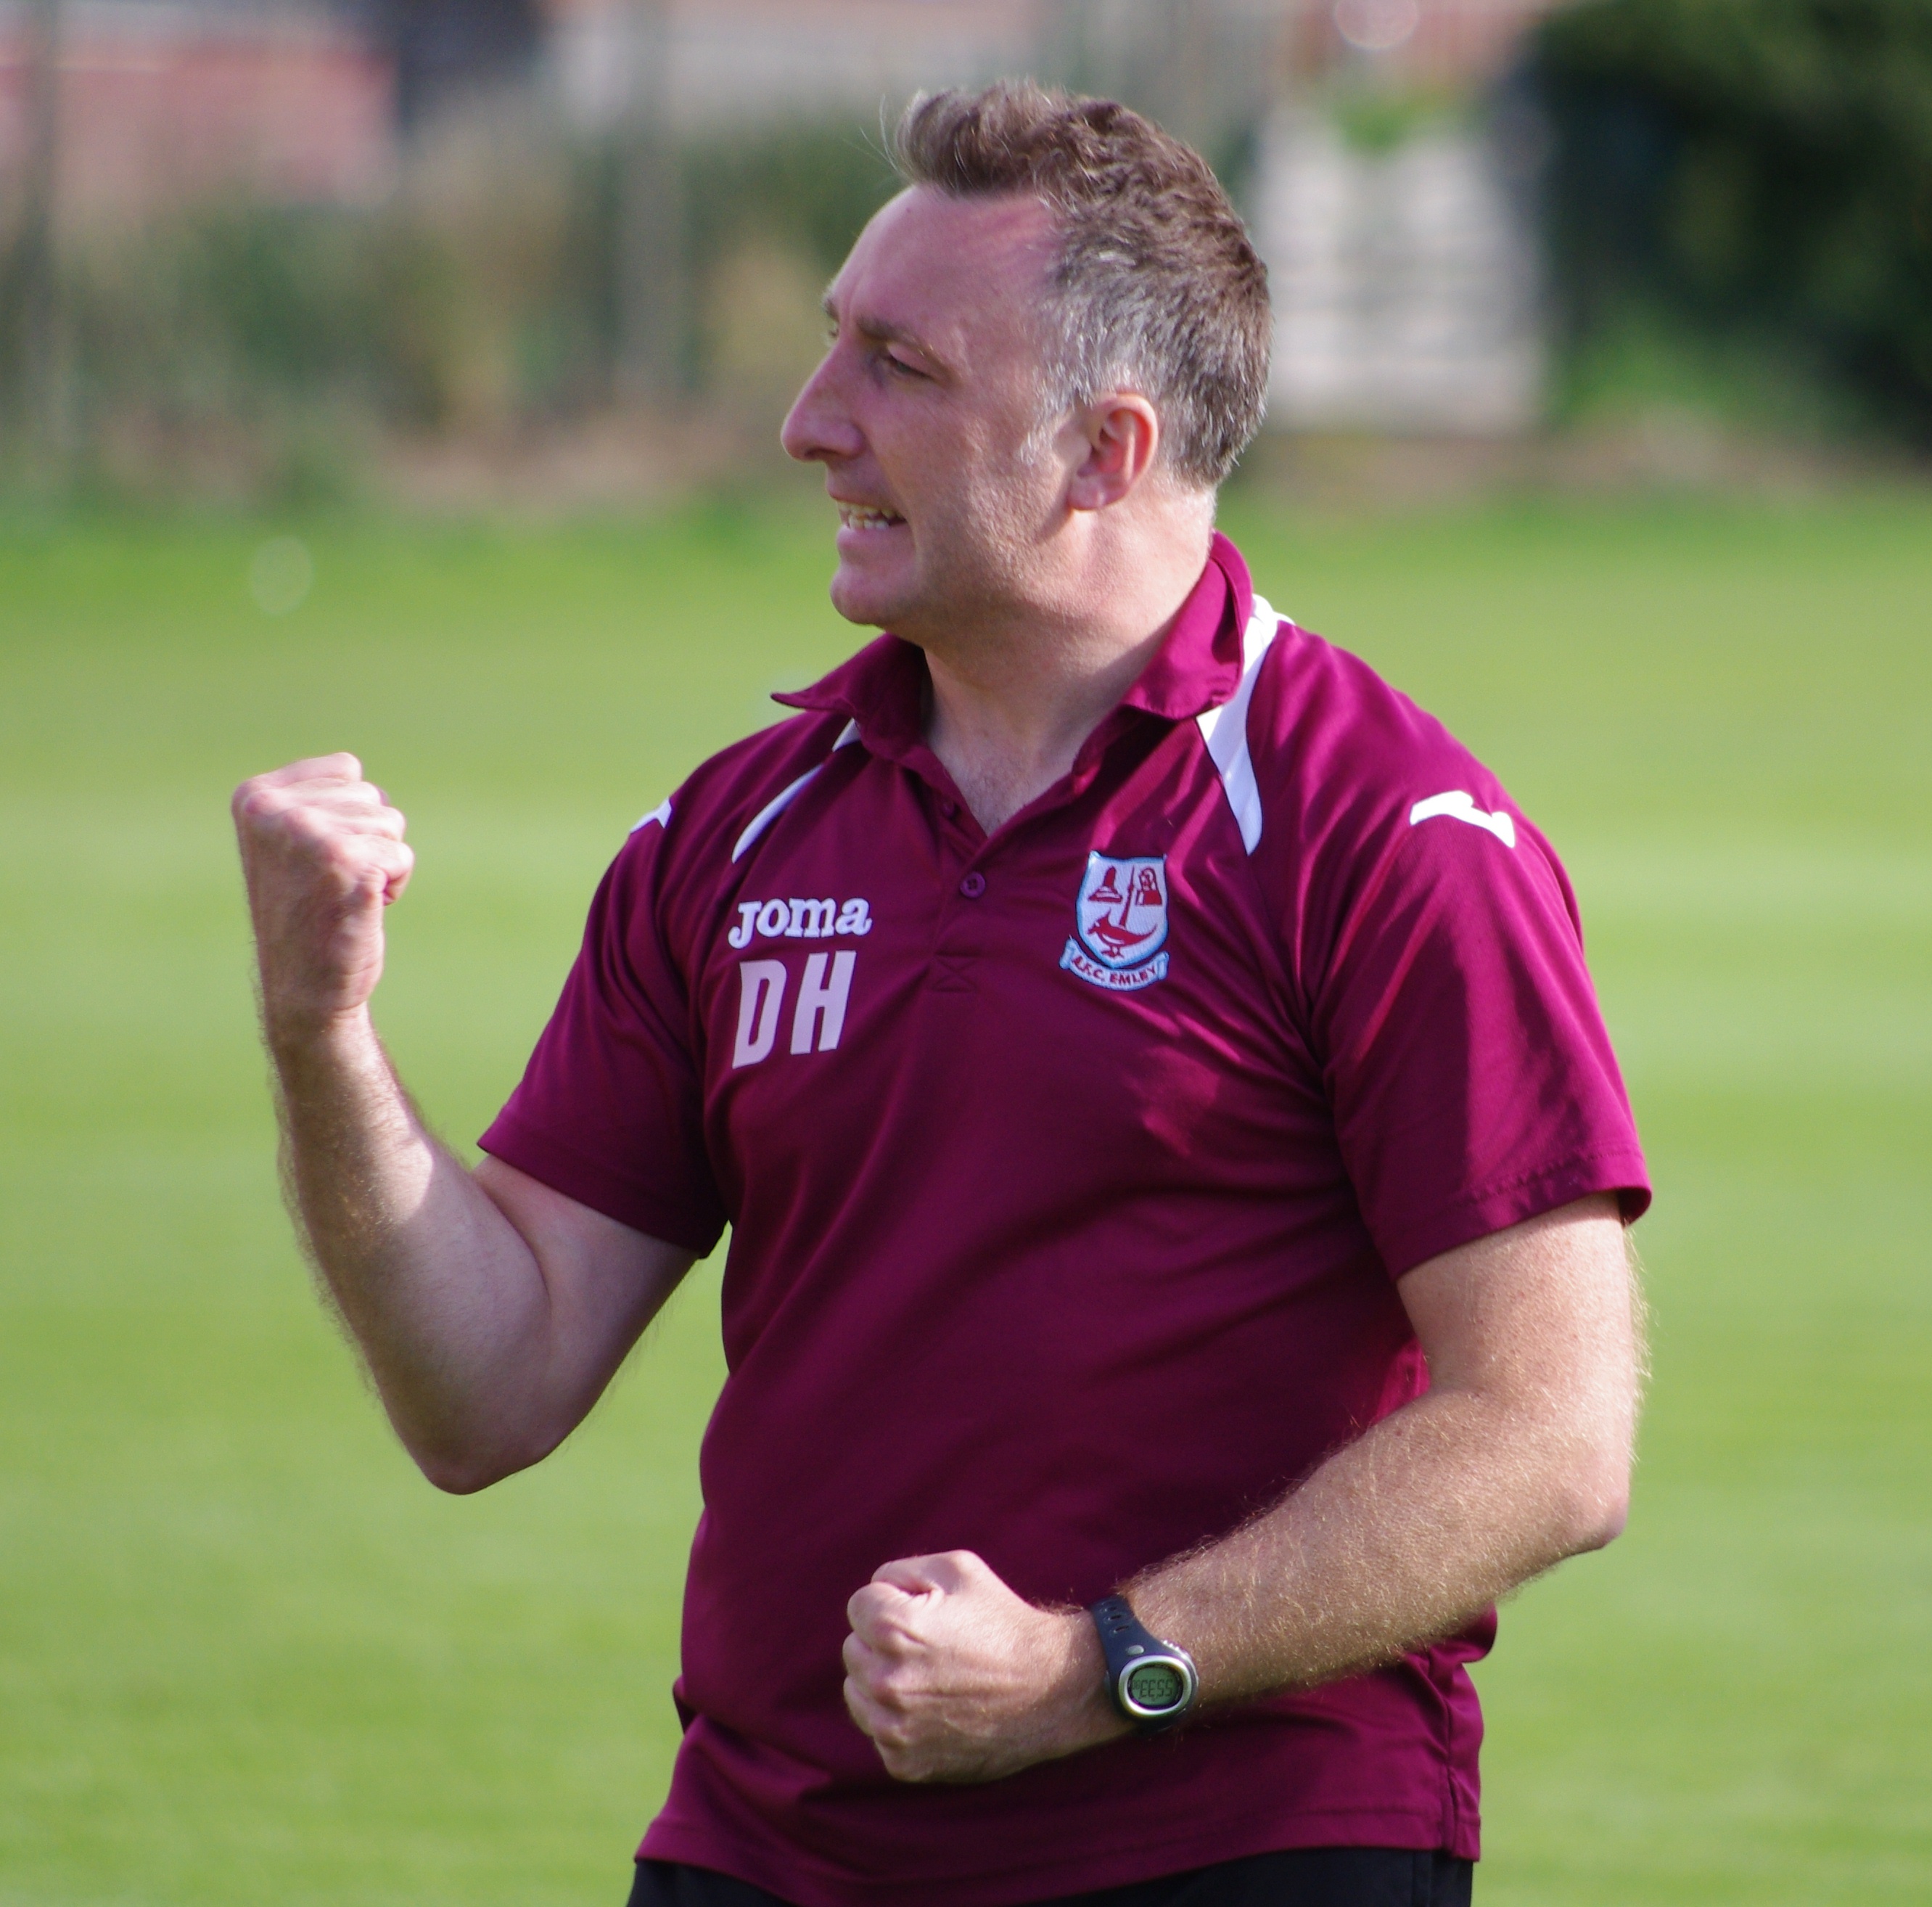 Get in there: Darren Hepworth's AFC Emley have won the Team of the Weekend vote for their incredible 3-2 victory over Shaw Lane Aquaforce